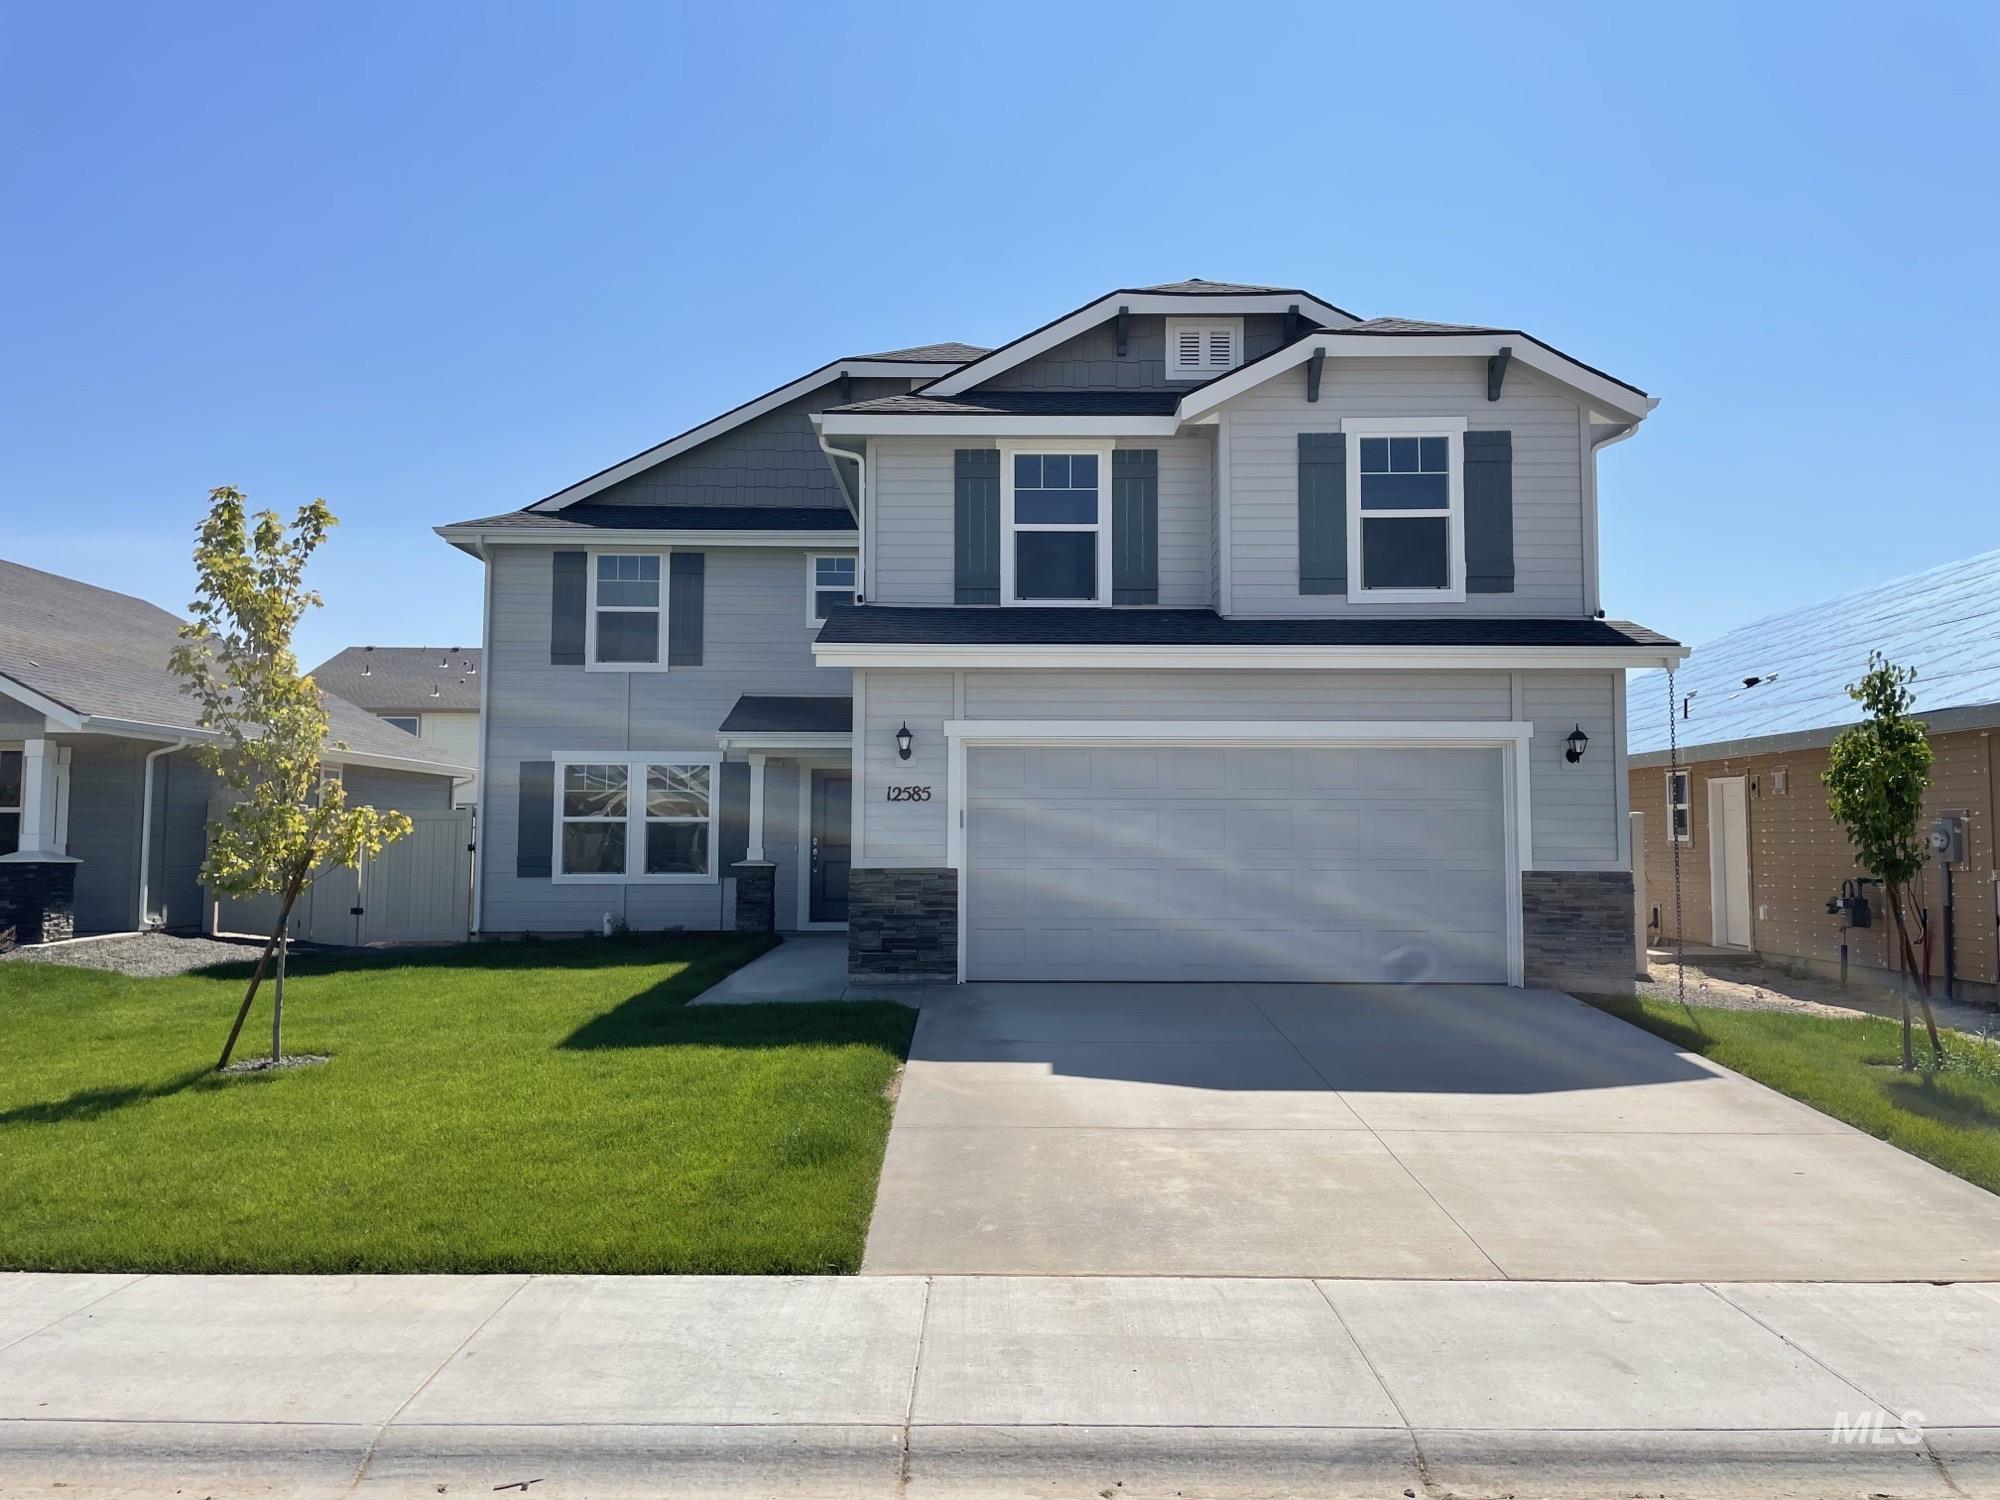 12585 Goff St, Caldwell, Idaho 83607, 4 Bedrooms, 3.5 Bathrooms, Residential For Sale, Price $440,990,MLS 98841379